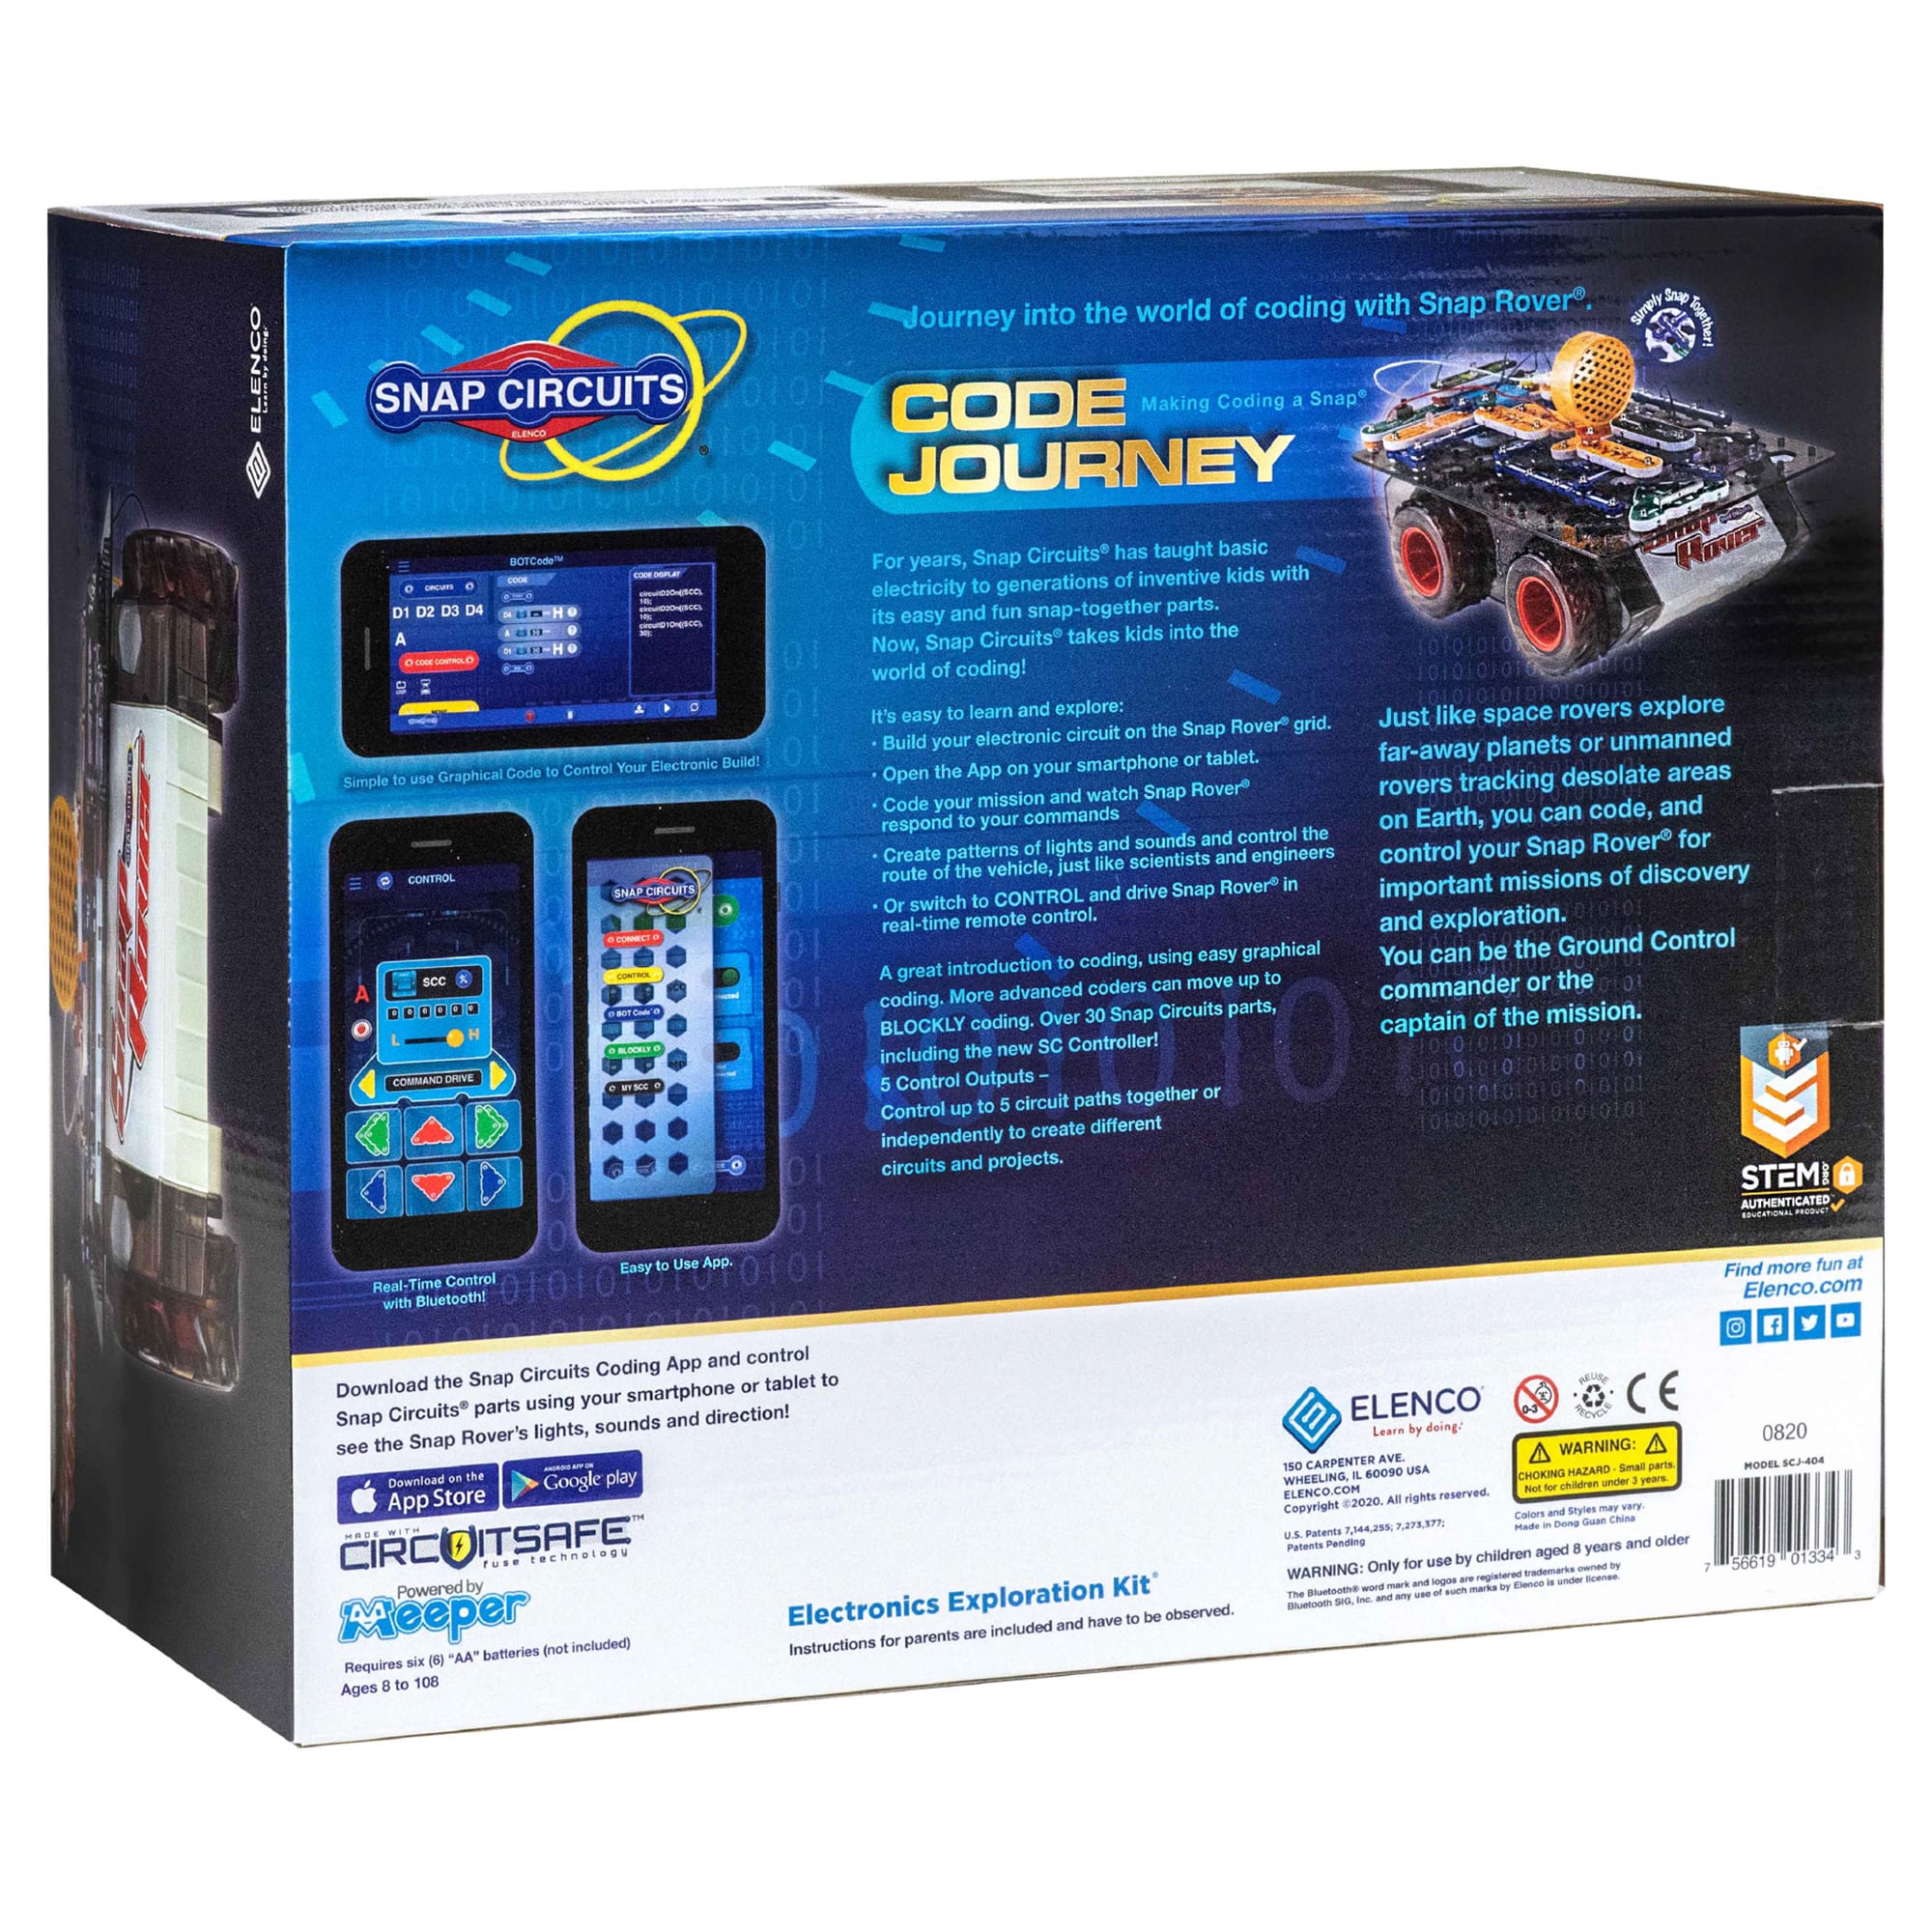 Snap Circuits&#xAE; Code Journey Build Your Circuit STEM Building Toy